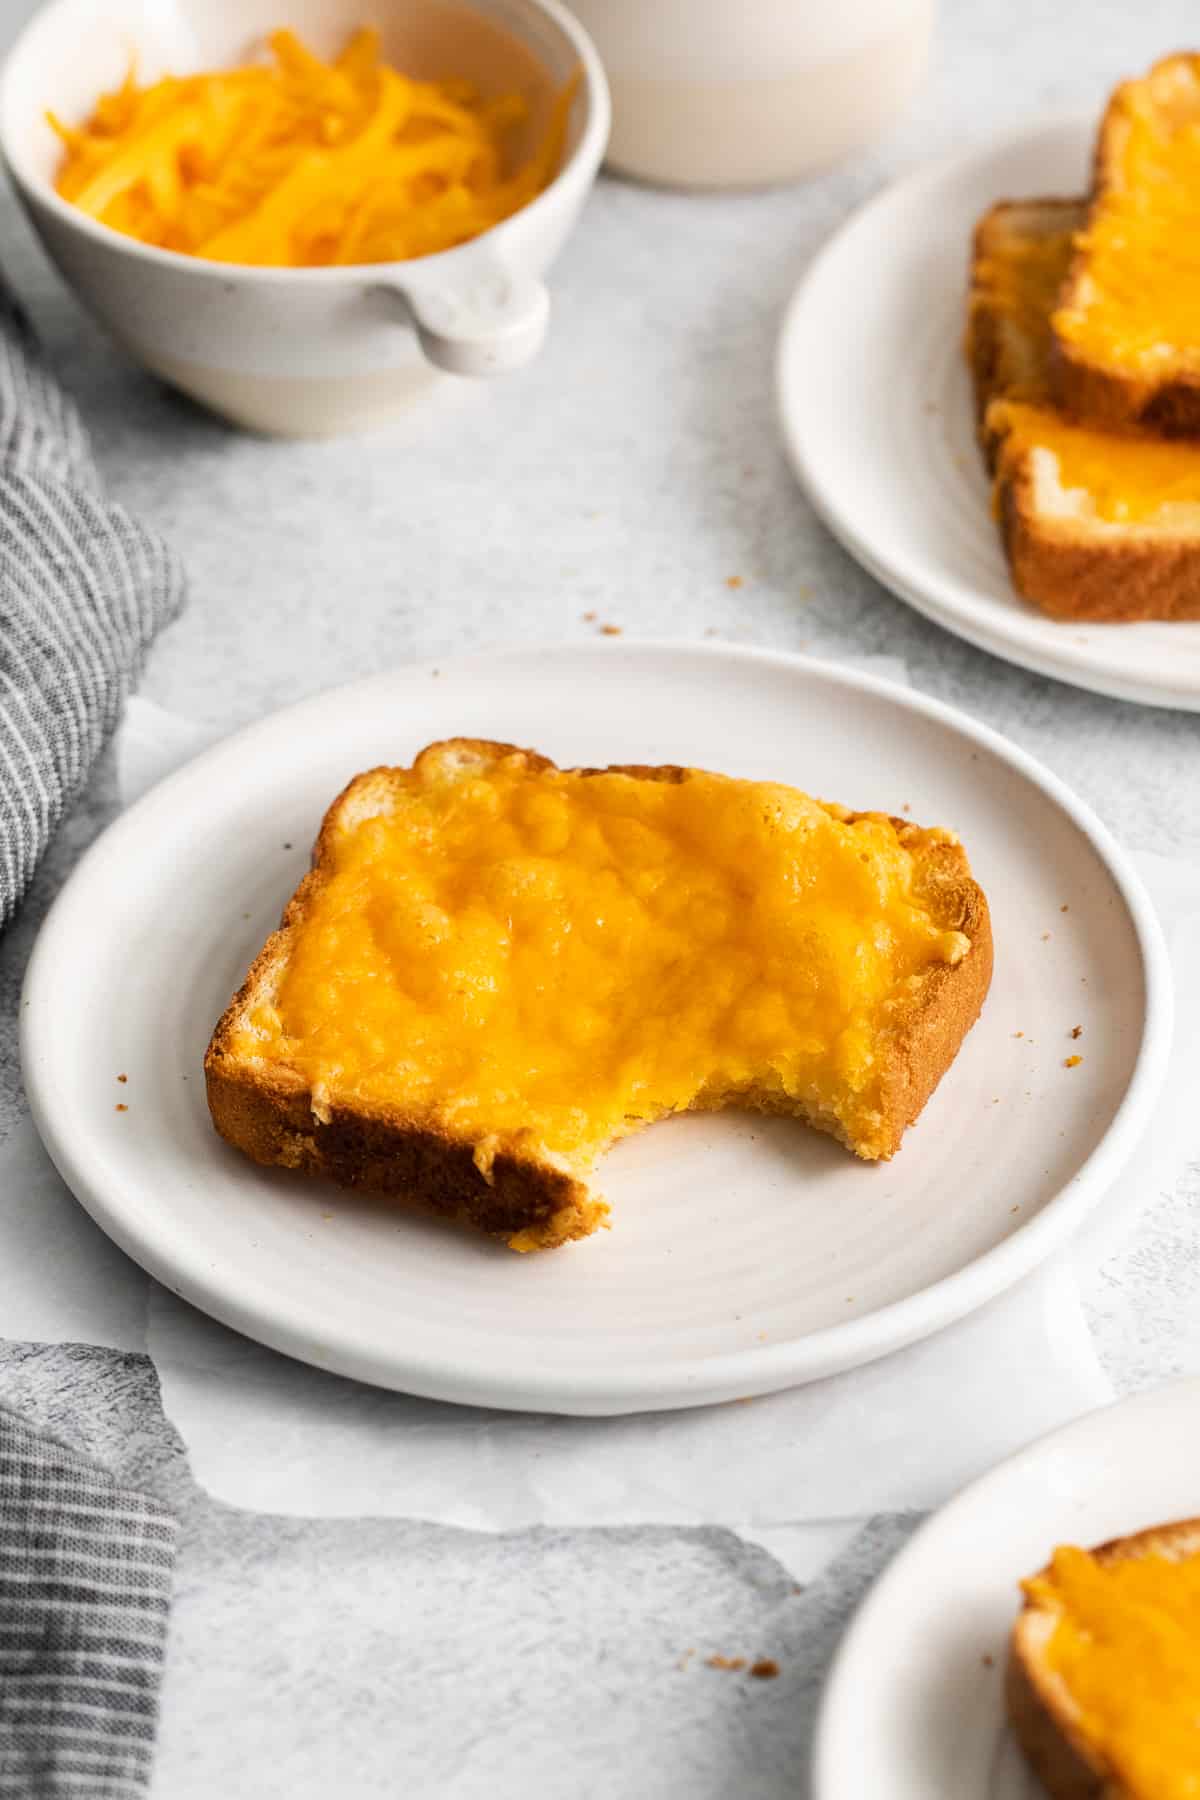 Cheese toast with a bite taken out of it.